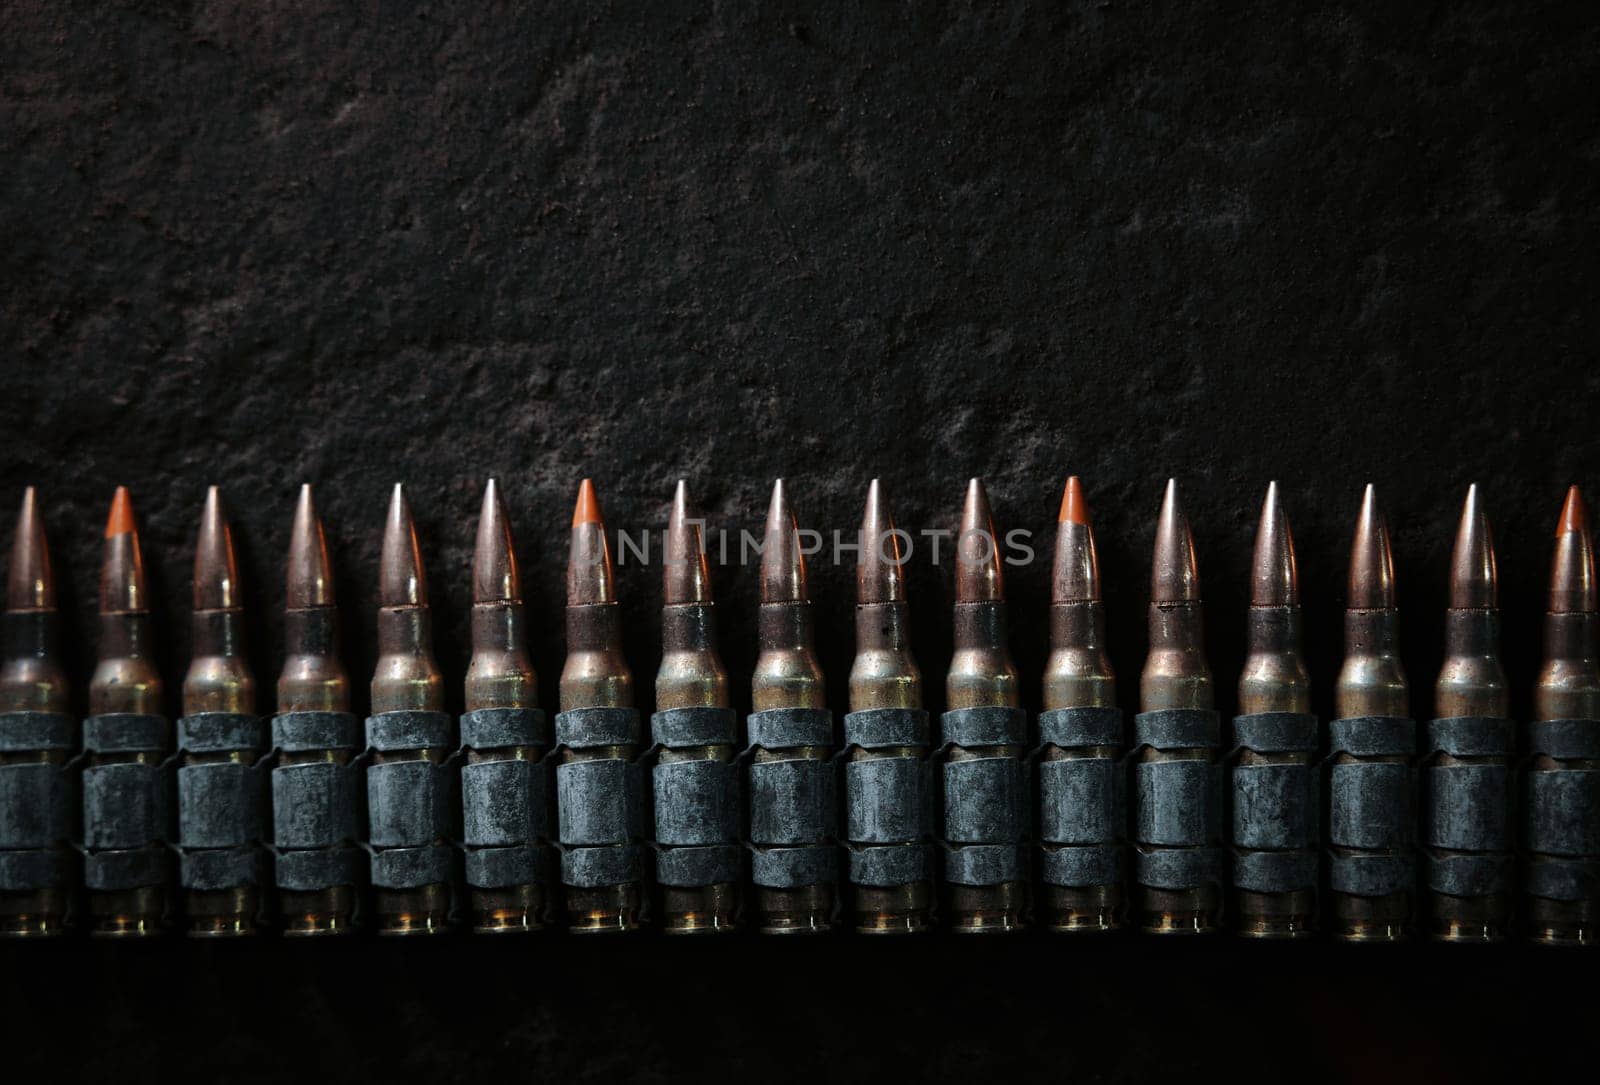 Machine gun bullet belt on the floor. Background on the military theme. Ammo, chain of ammo on concrete background. Top view of machine gun belt cartridge 7.62 mm caliber on dark background by EvgeniyQW